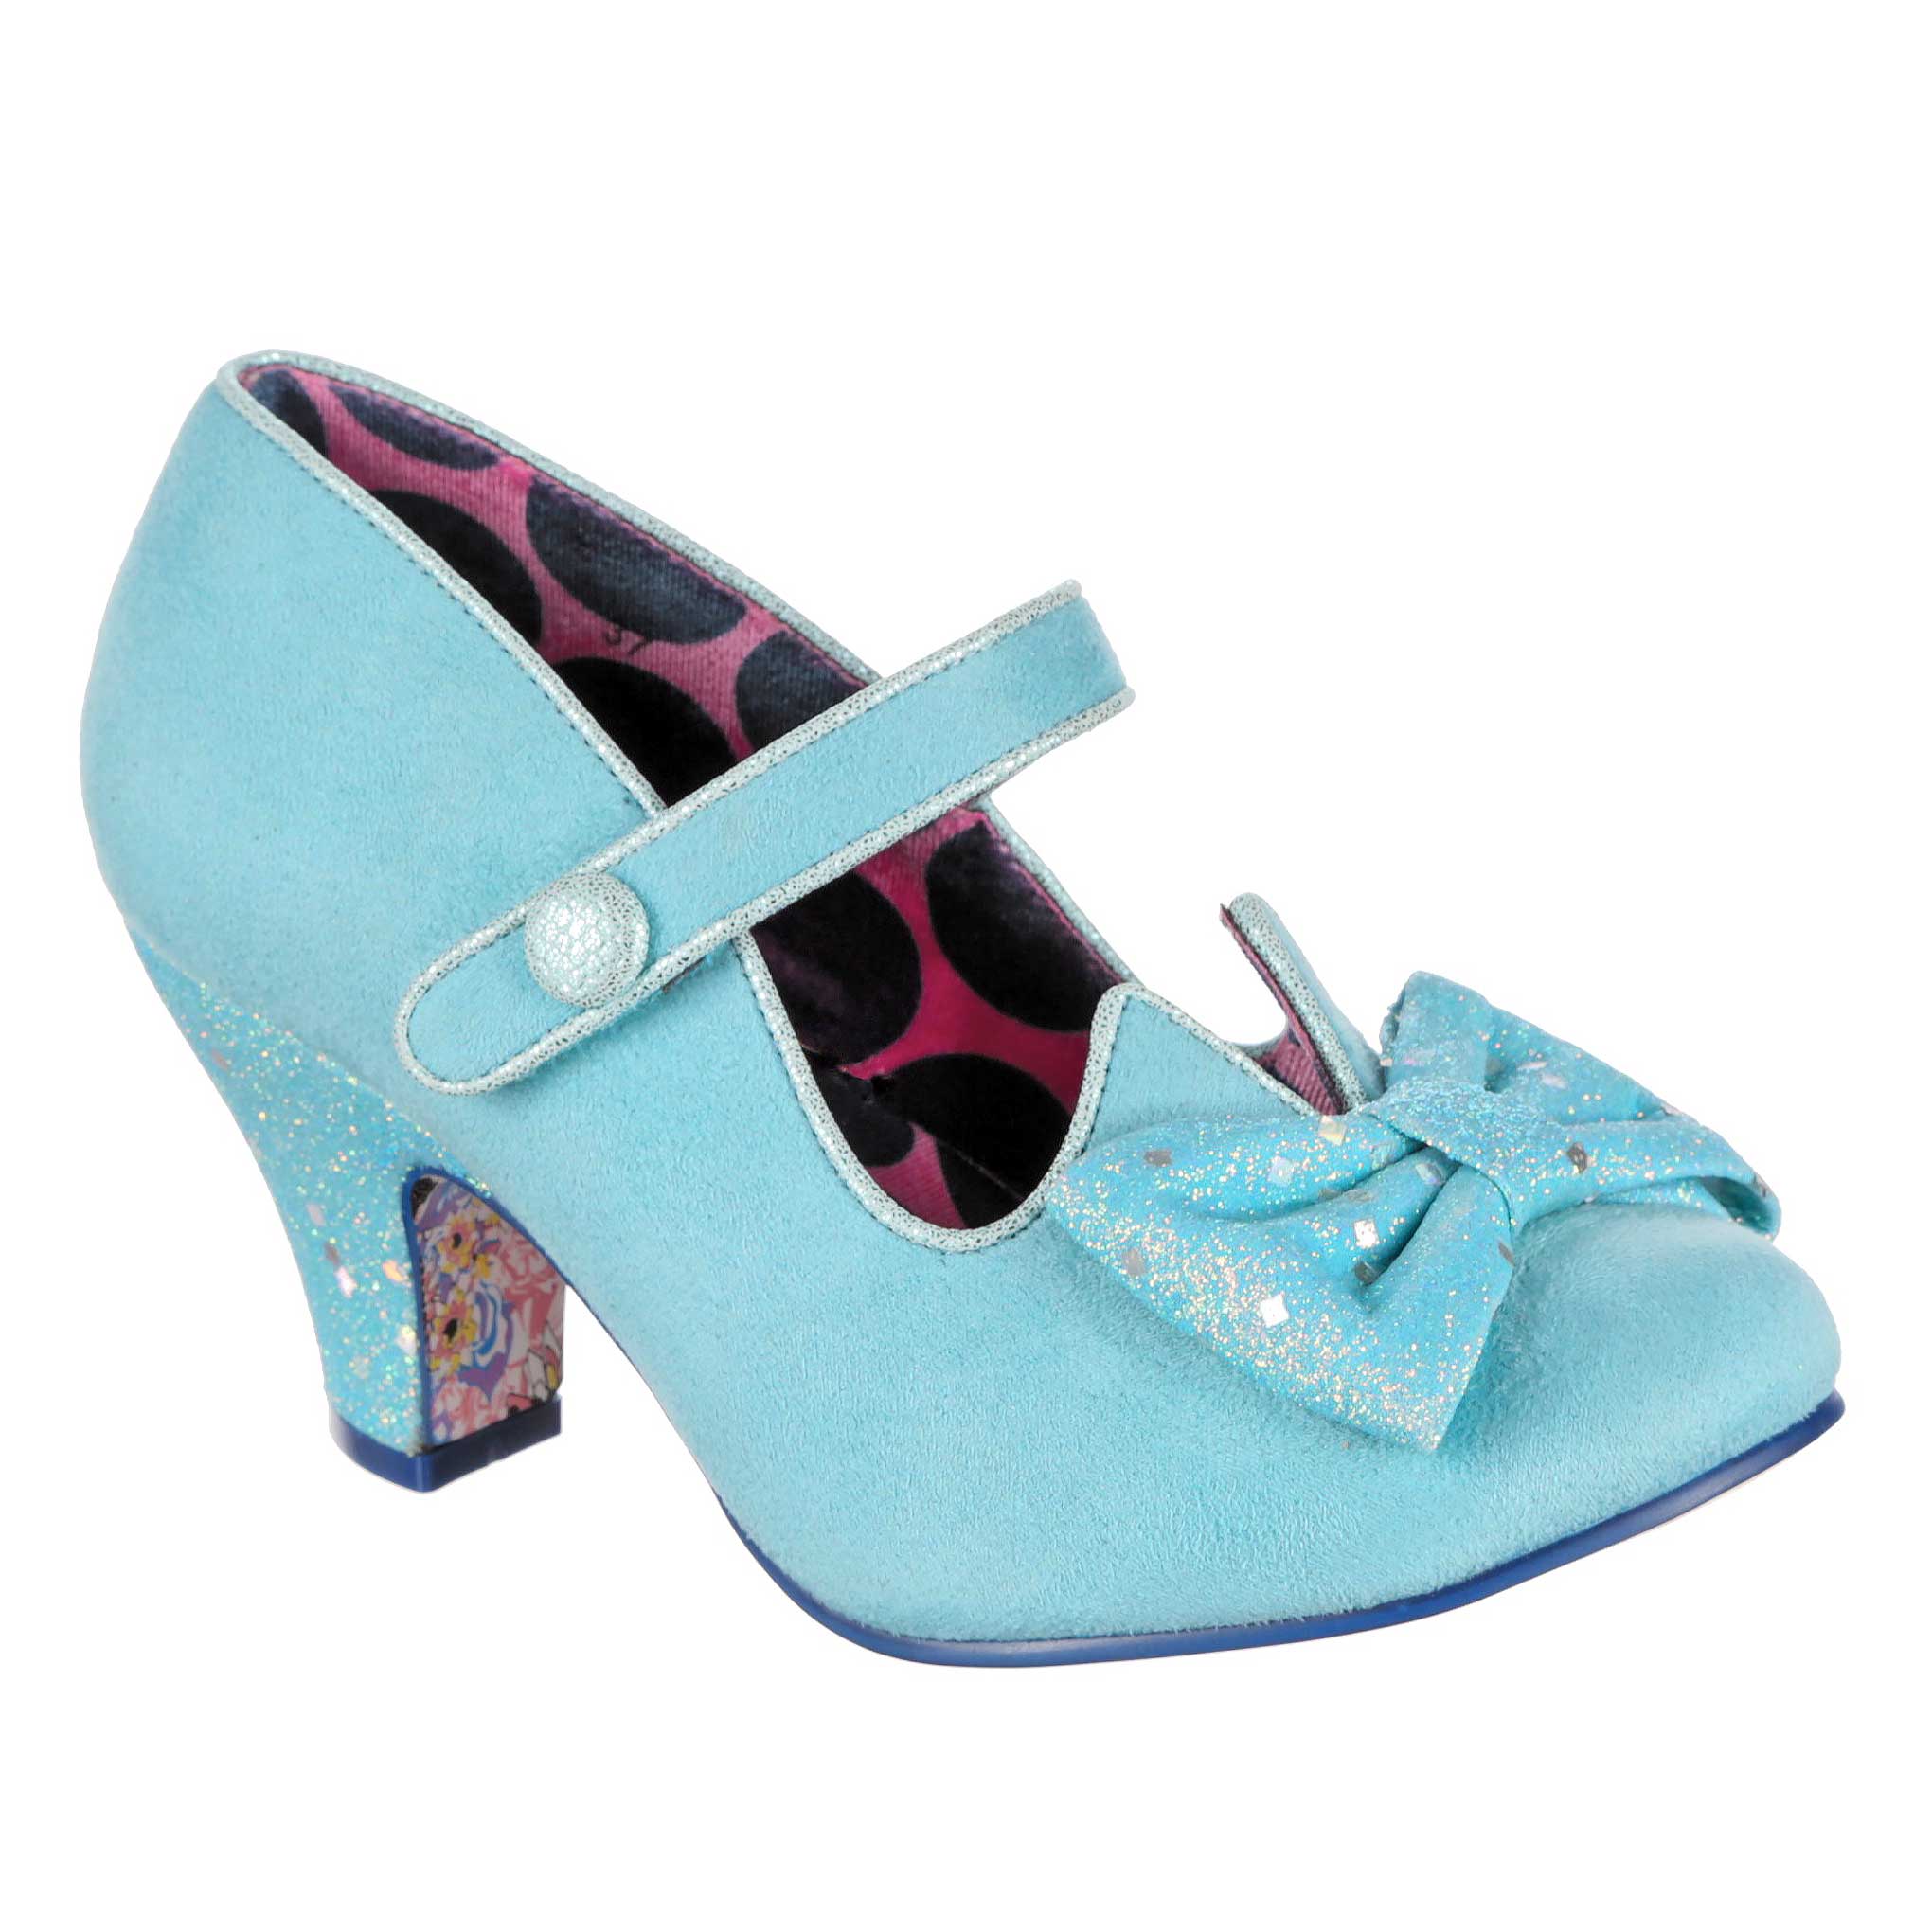 Irregular Choice Banjo Time Women's Mid Heel Shoes With Bow In Blue Size 5.5